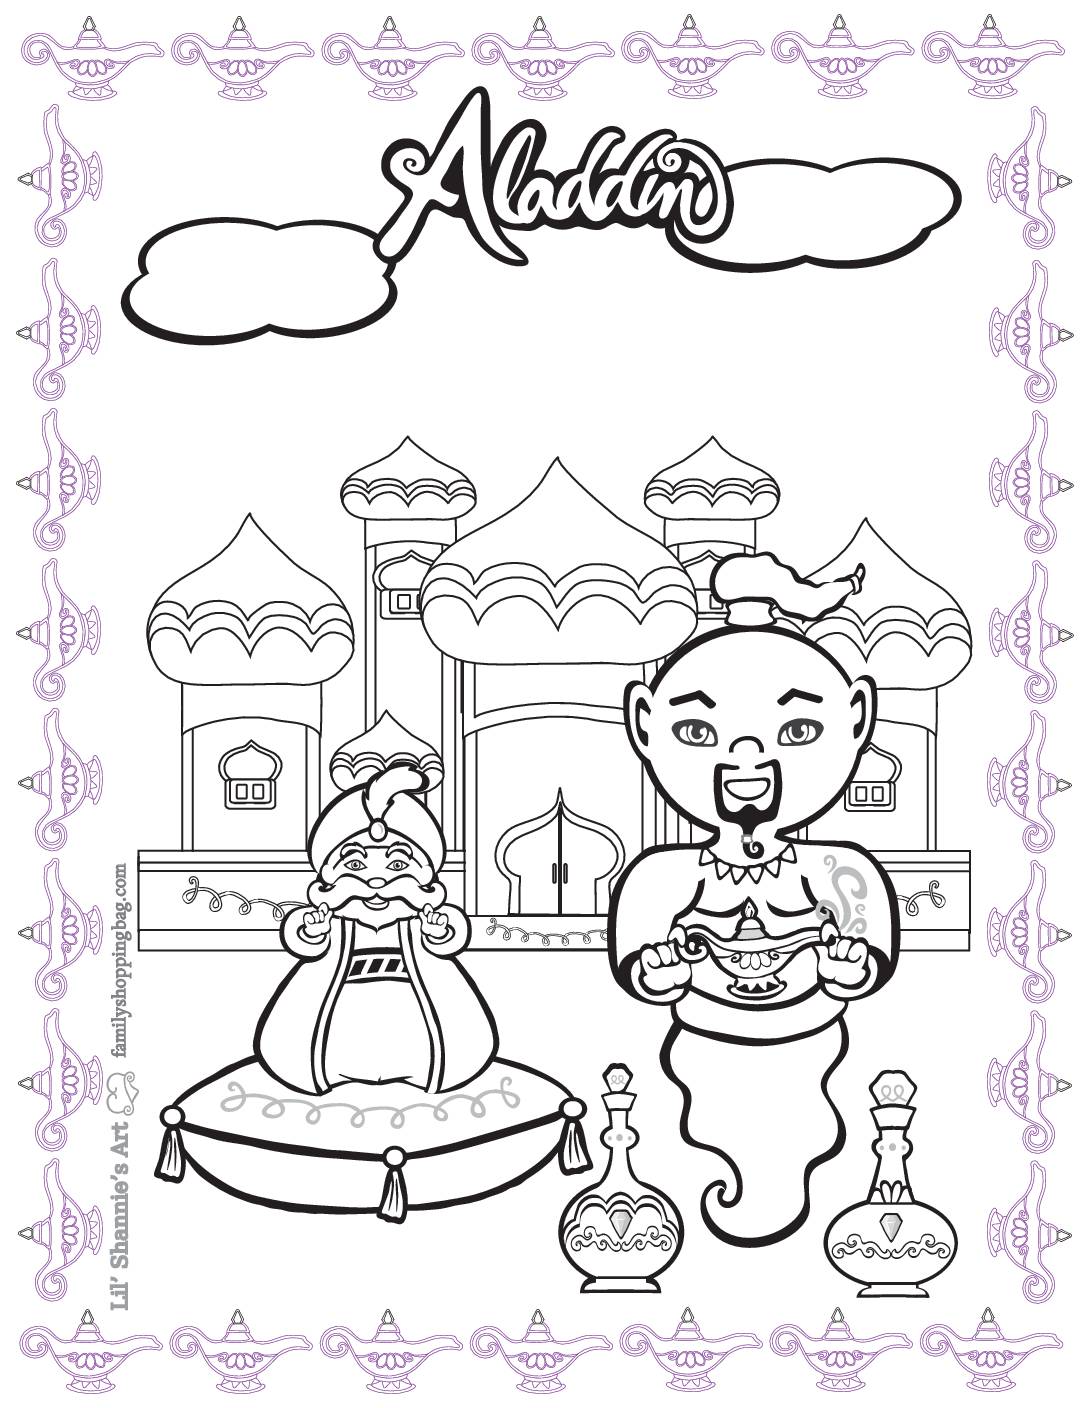 Coloring 3 Page Aladdin Coloring Pages